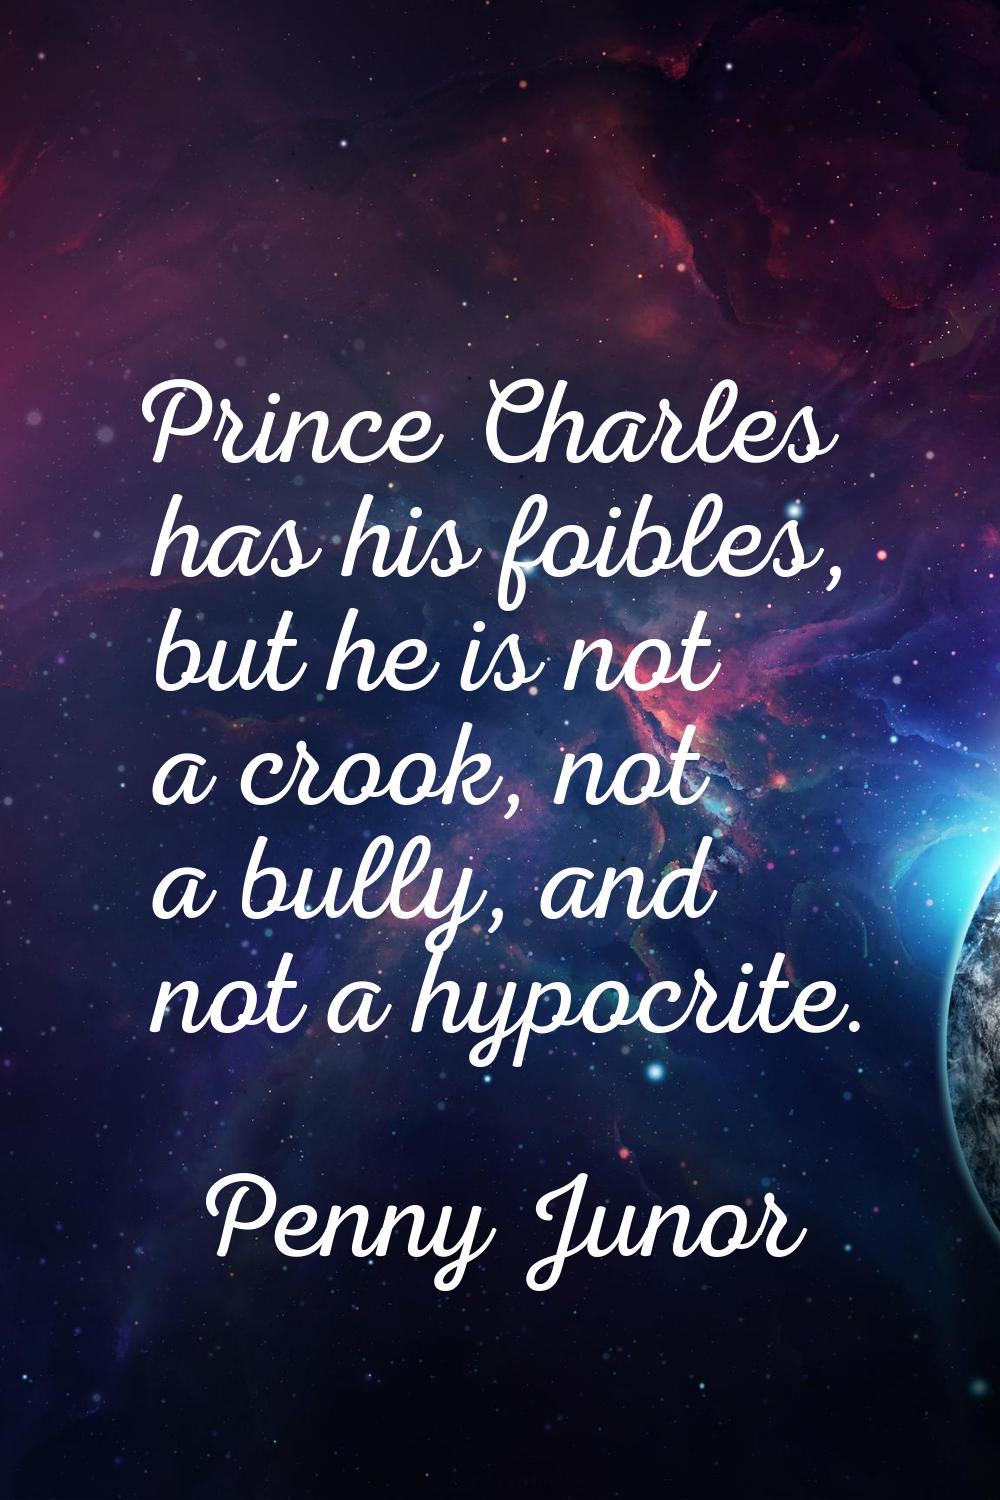 Prince Charles has his foibles, but he is not a crook, not a bully, and not a hypocrite.